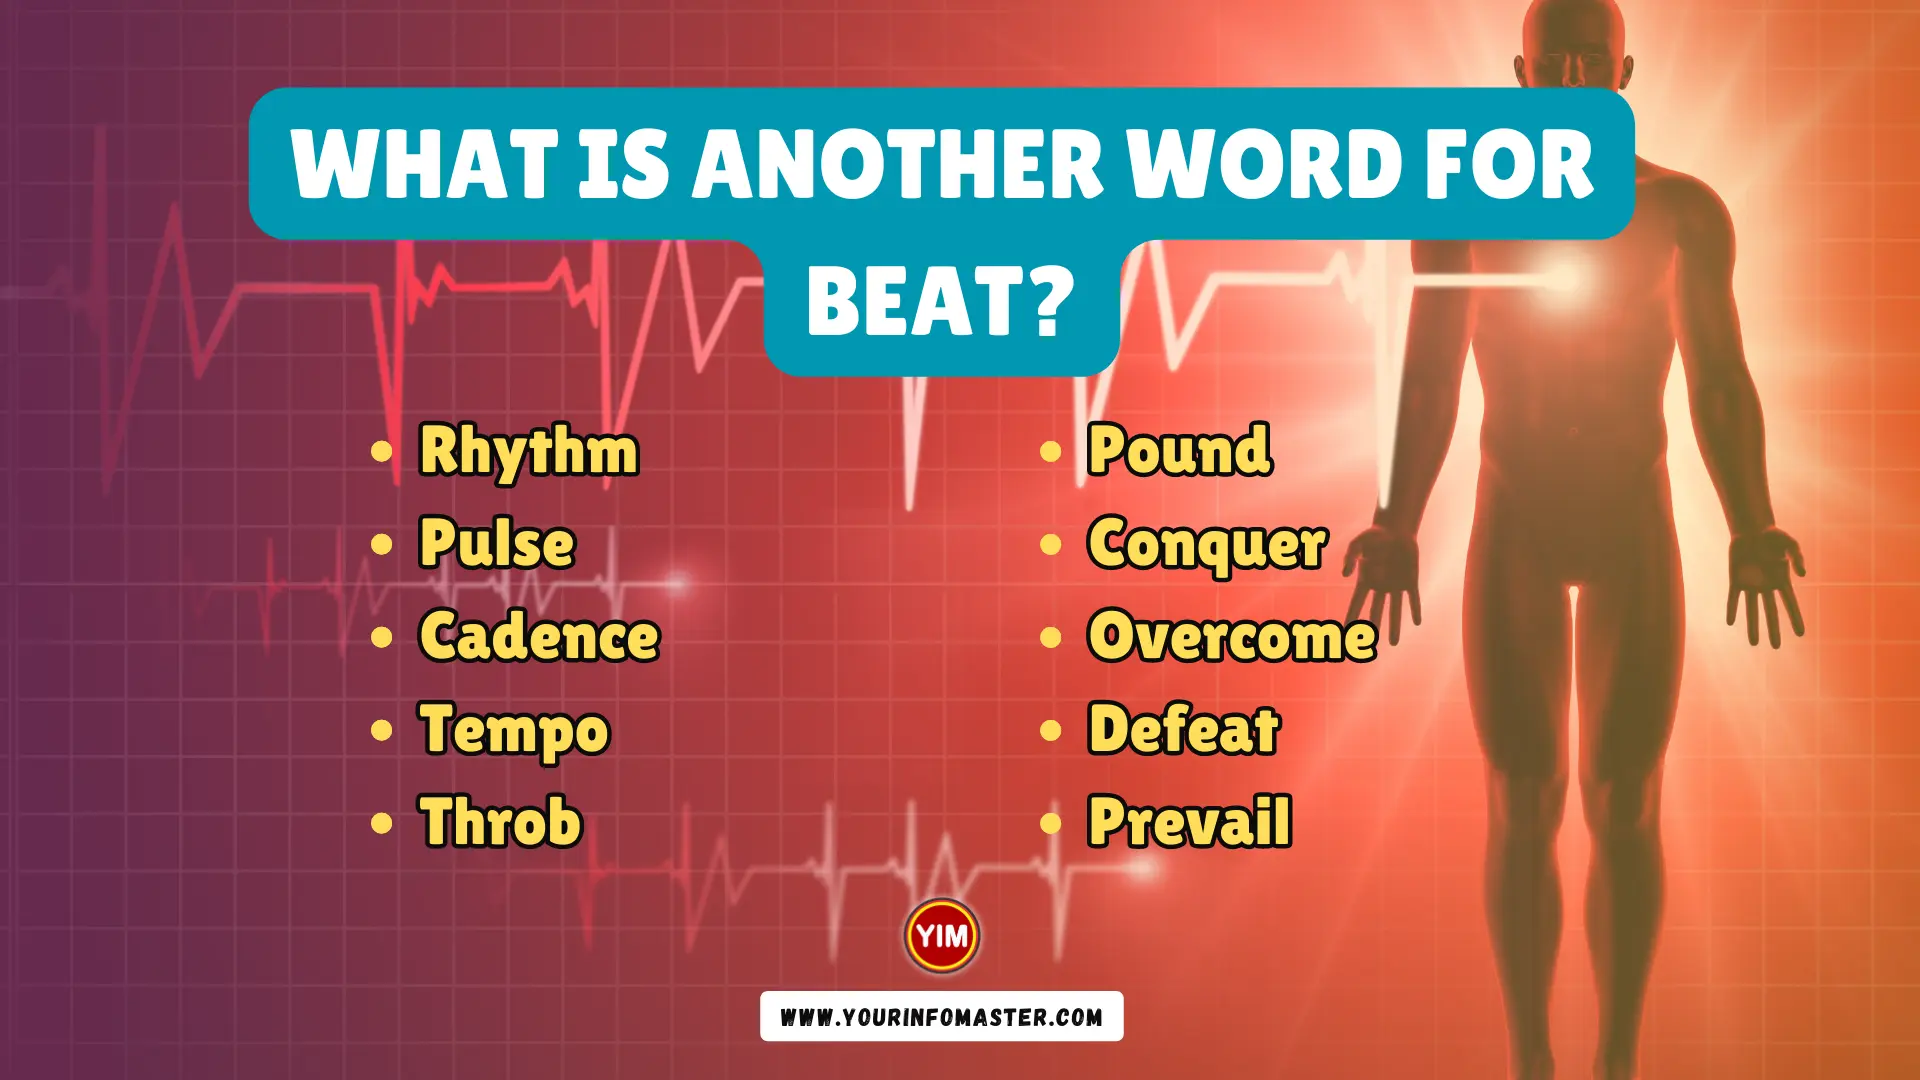 What is another word for Beat